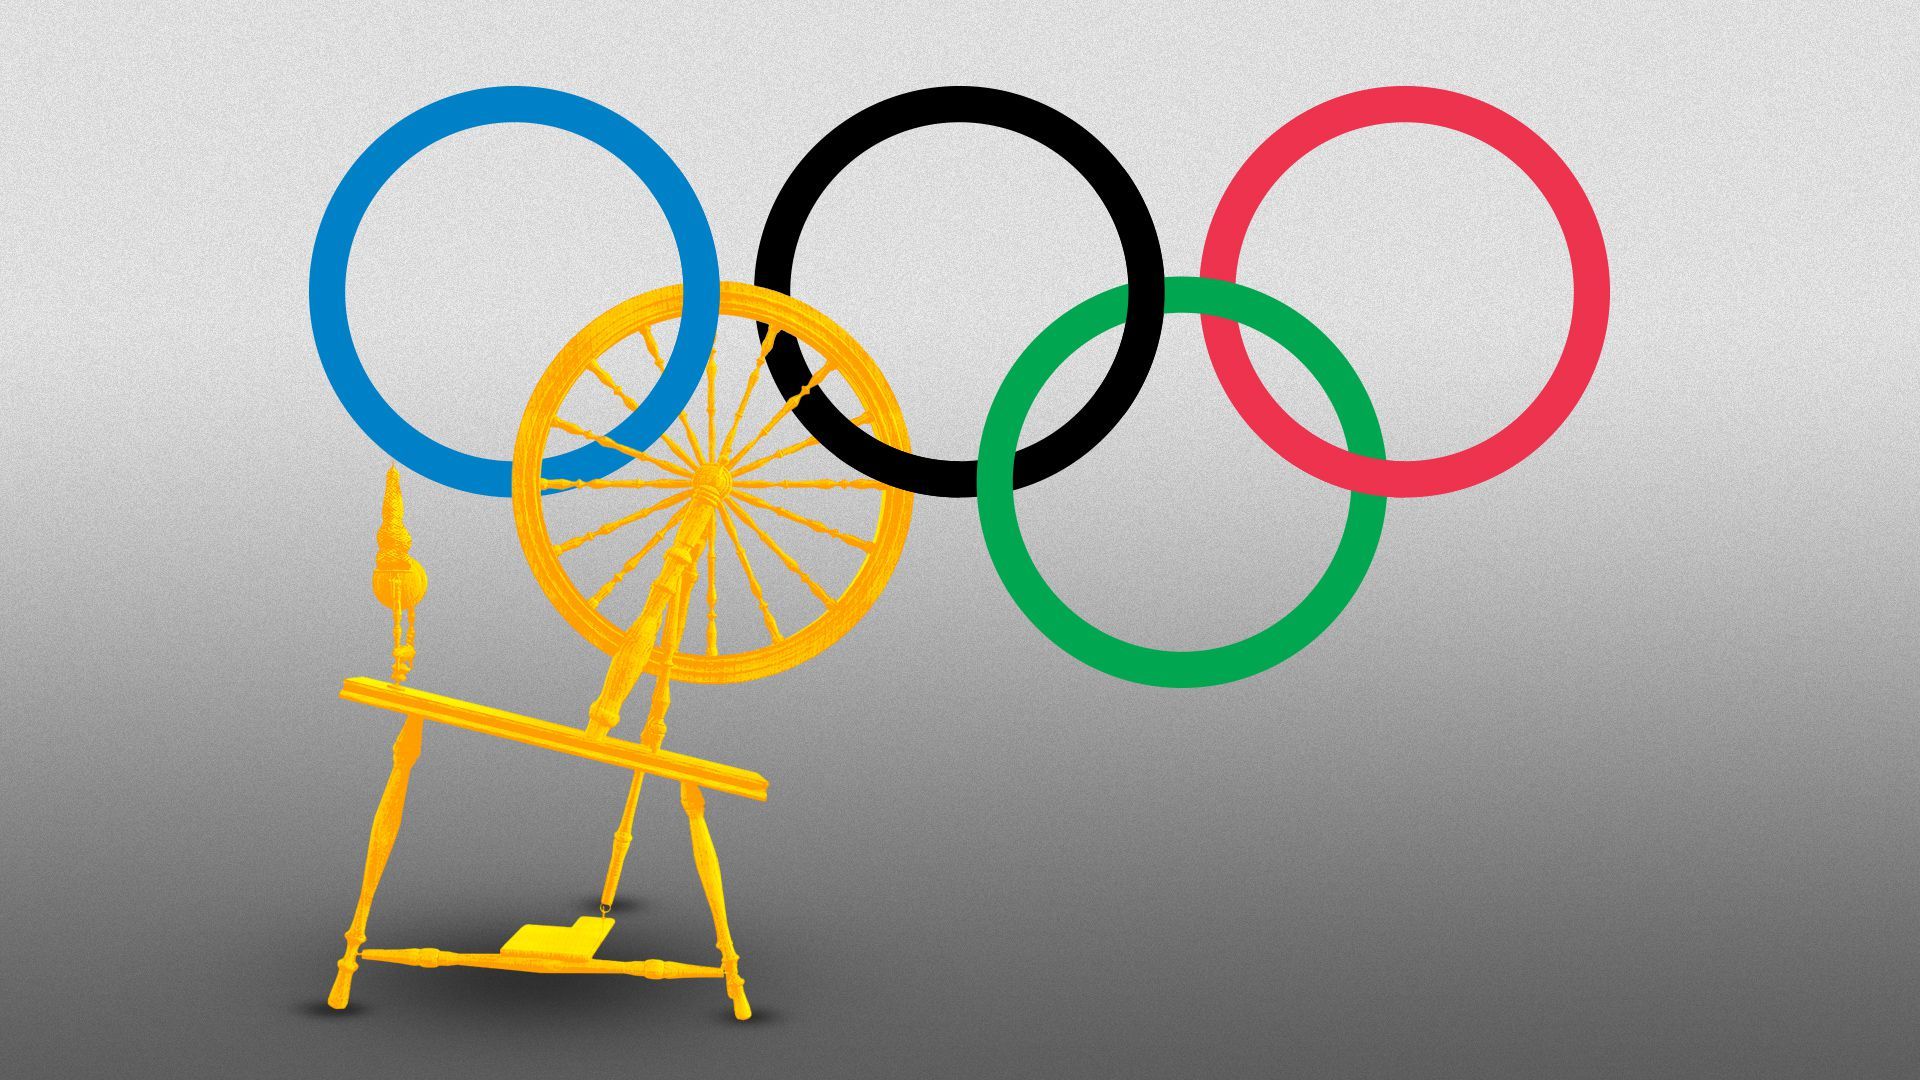 Illustration of the Olympic rings with one of the rings made from a spinning wheel.  